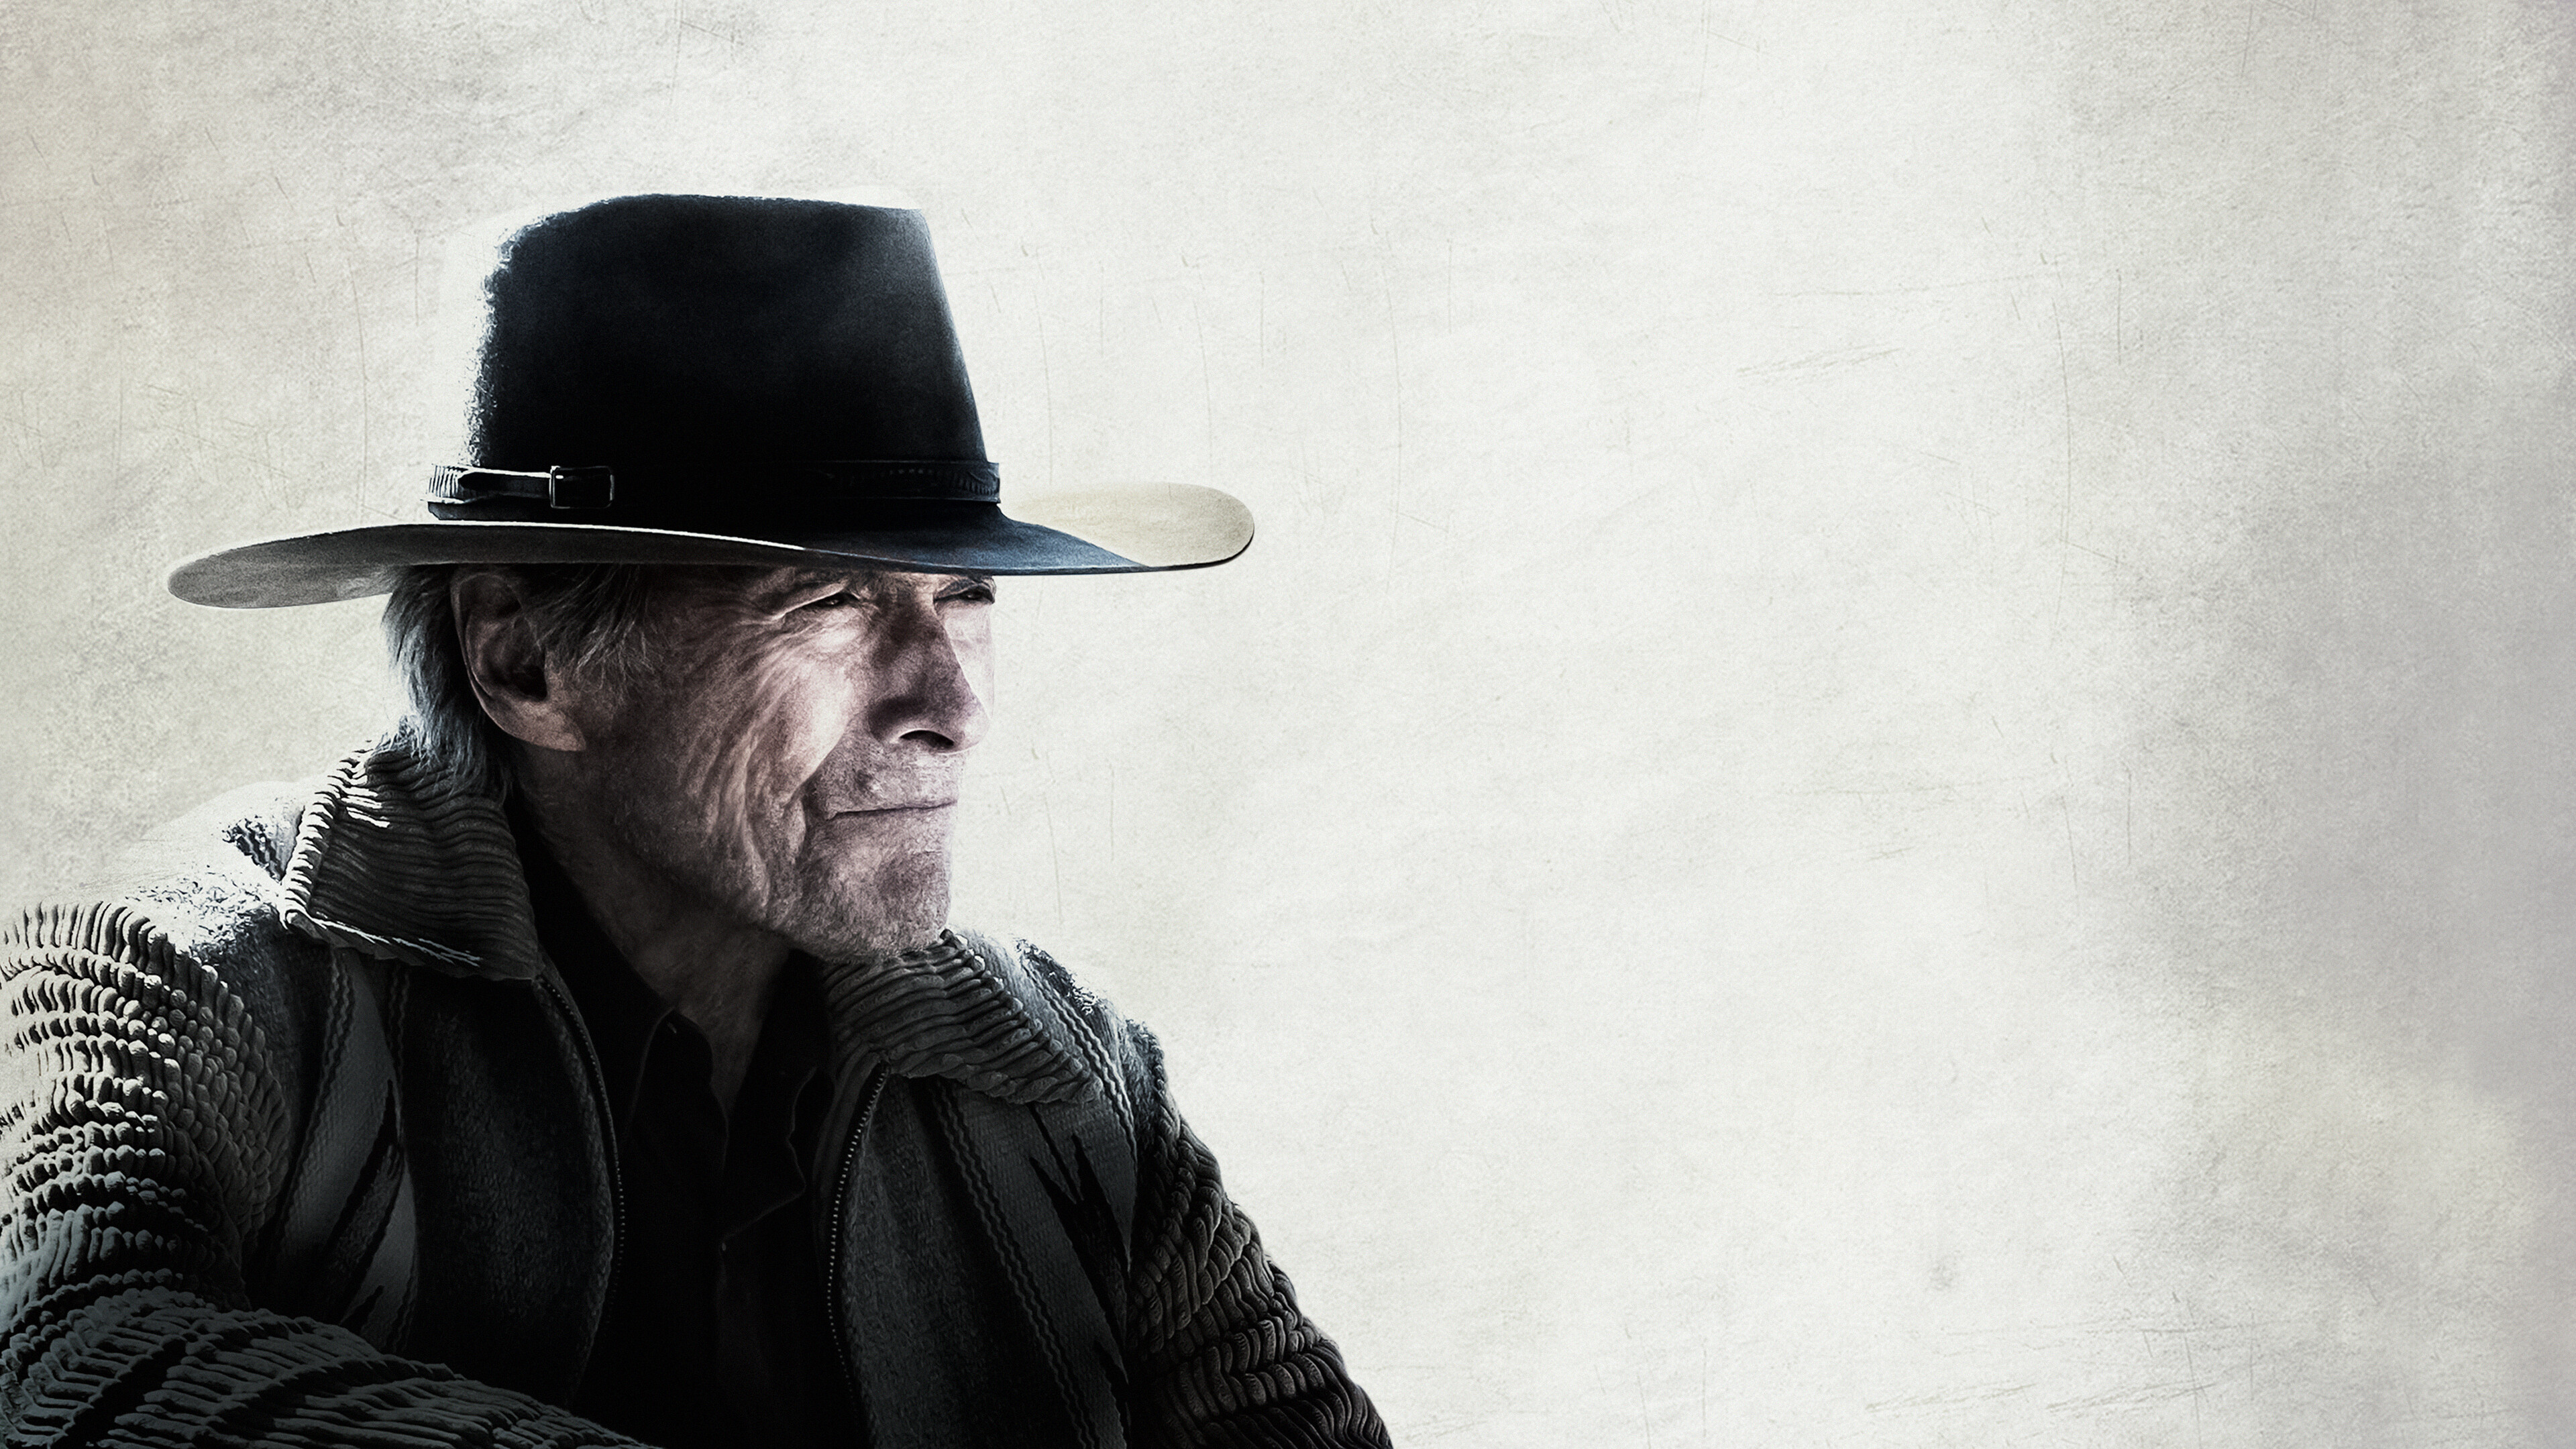 Clint Eastwood: Cry Macho, American Neo-Western Drama Film, Warner Bros. Pictures, Based On 1975 Novel Written By N. Richard Nash. 3840x2160 4K Background.